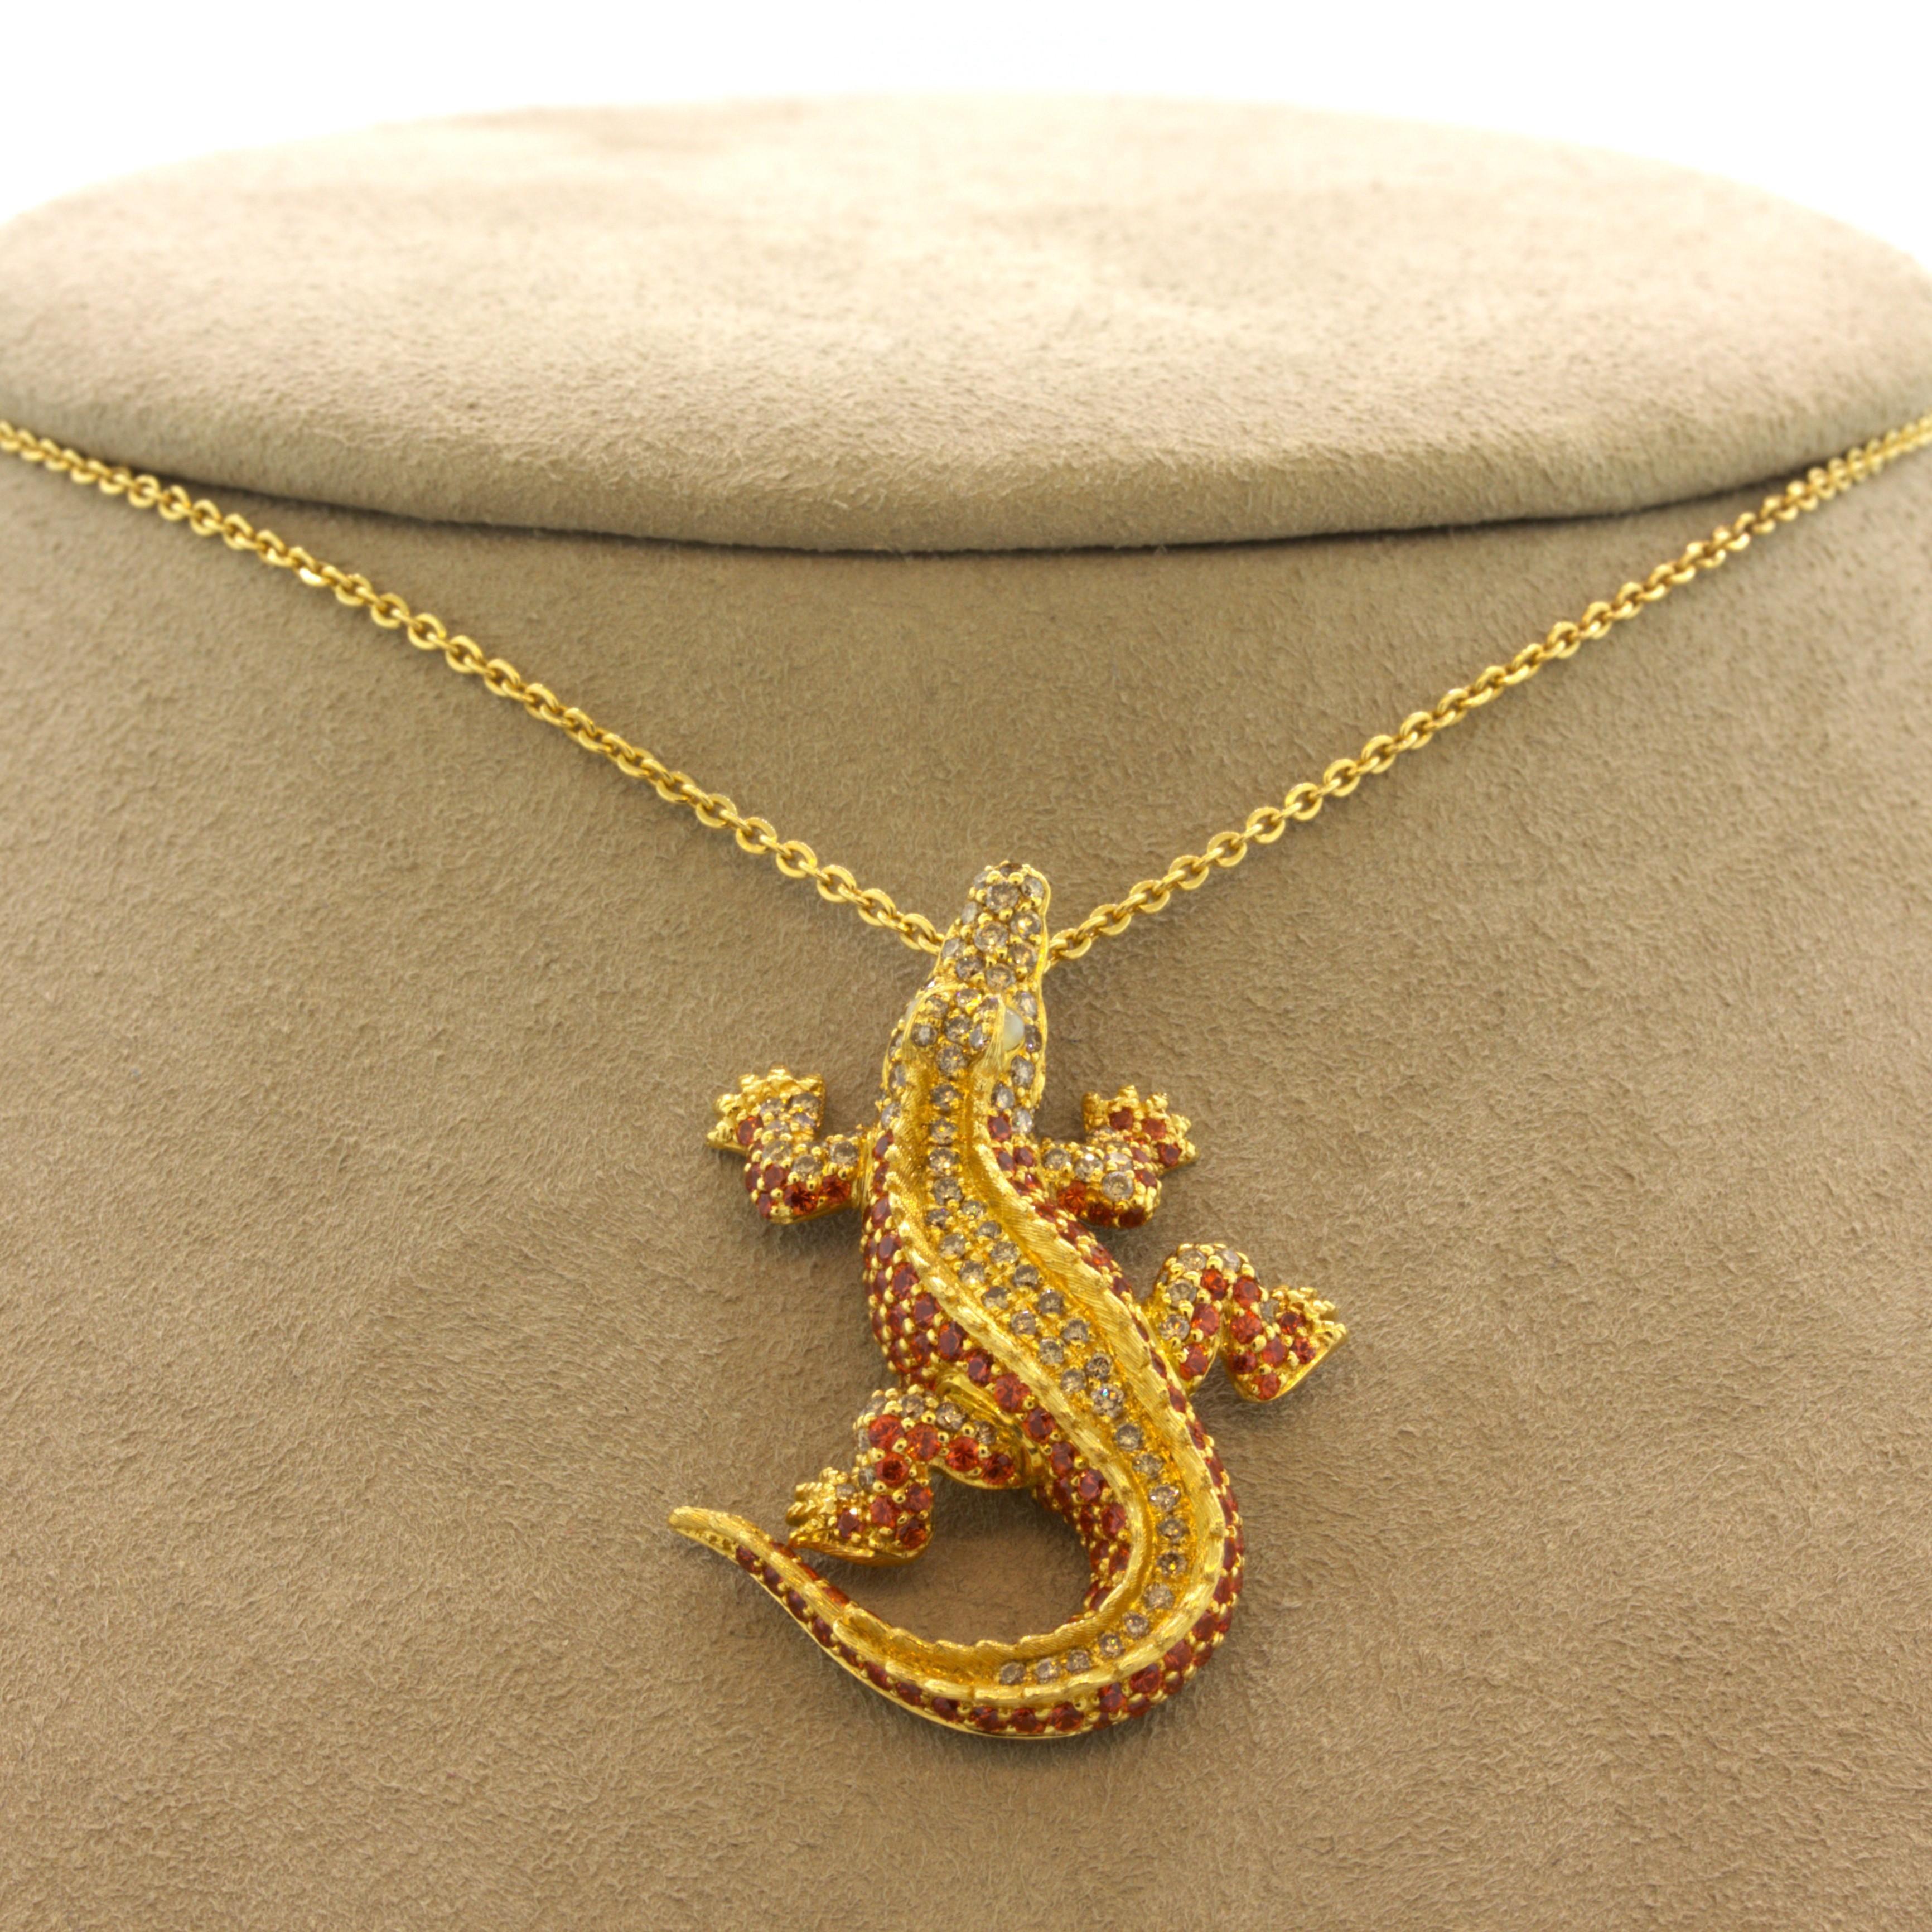 A fierce yet cut alligator studded with gems and diamonds! It features 1.78 carats of bright and vibrant orange sapphires along with 0.39 carats of round brilliant-cut diamonds set around the alligator’s body. Adding to that, the two cats' eye